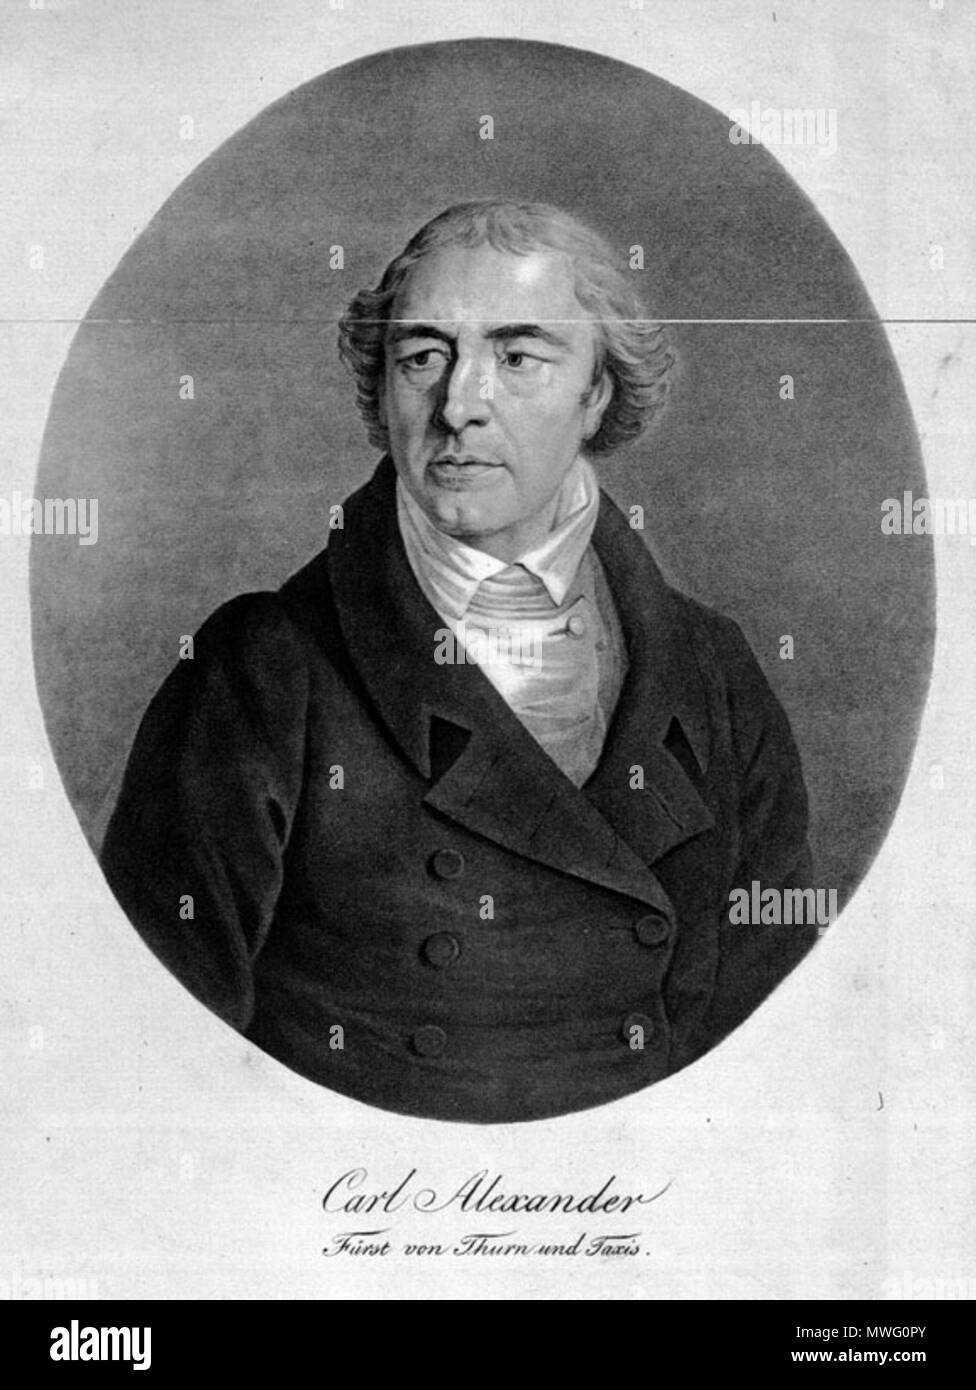 . Karl Alexander von Thurn und Taxis (1805 - 1827) . Commons upload by Michael Romanov 18:20, 25 July 2007. User Känsterle on nl.wikipedia 337 KAvTuT Stock Photo